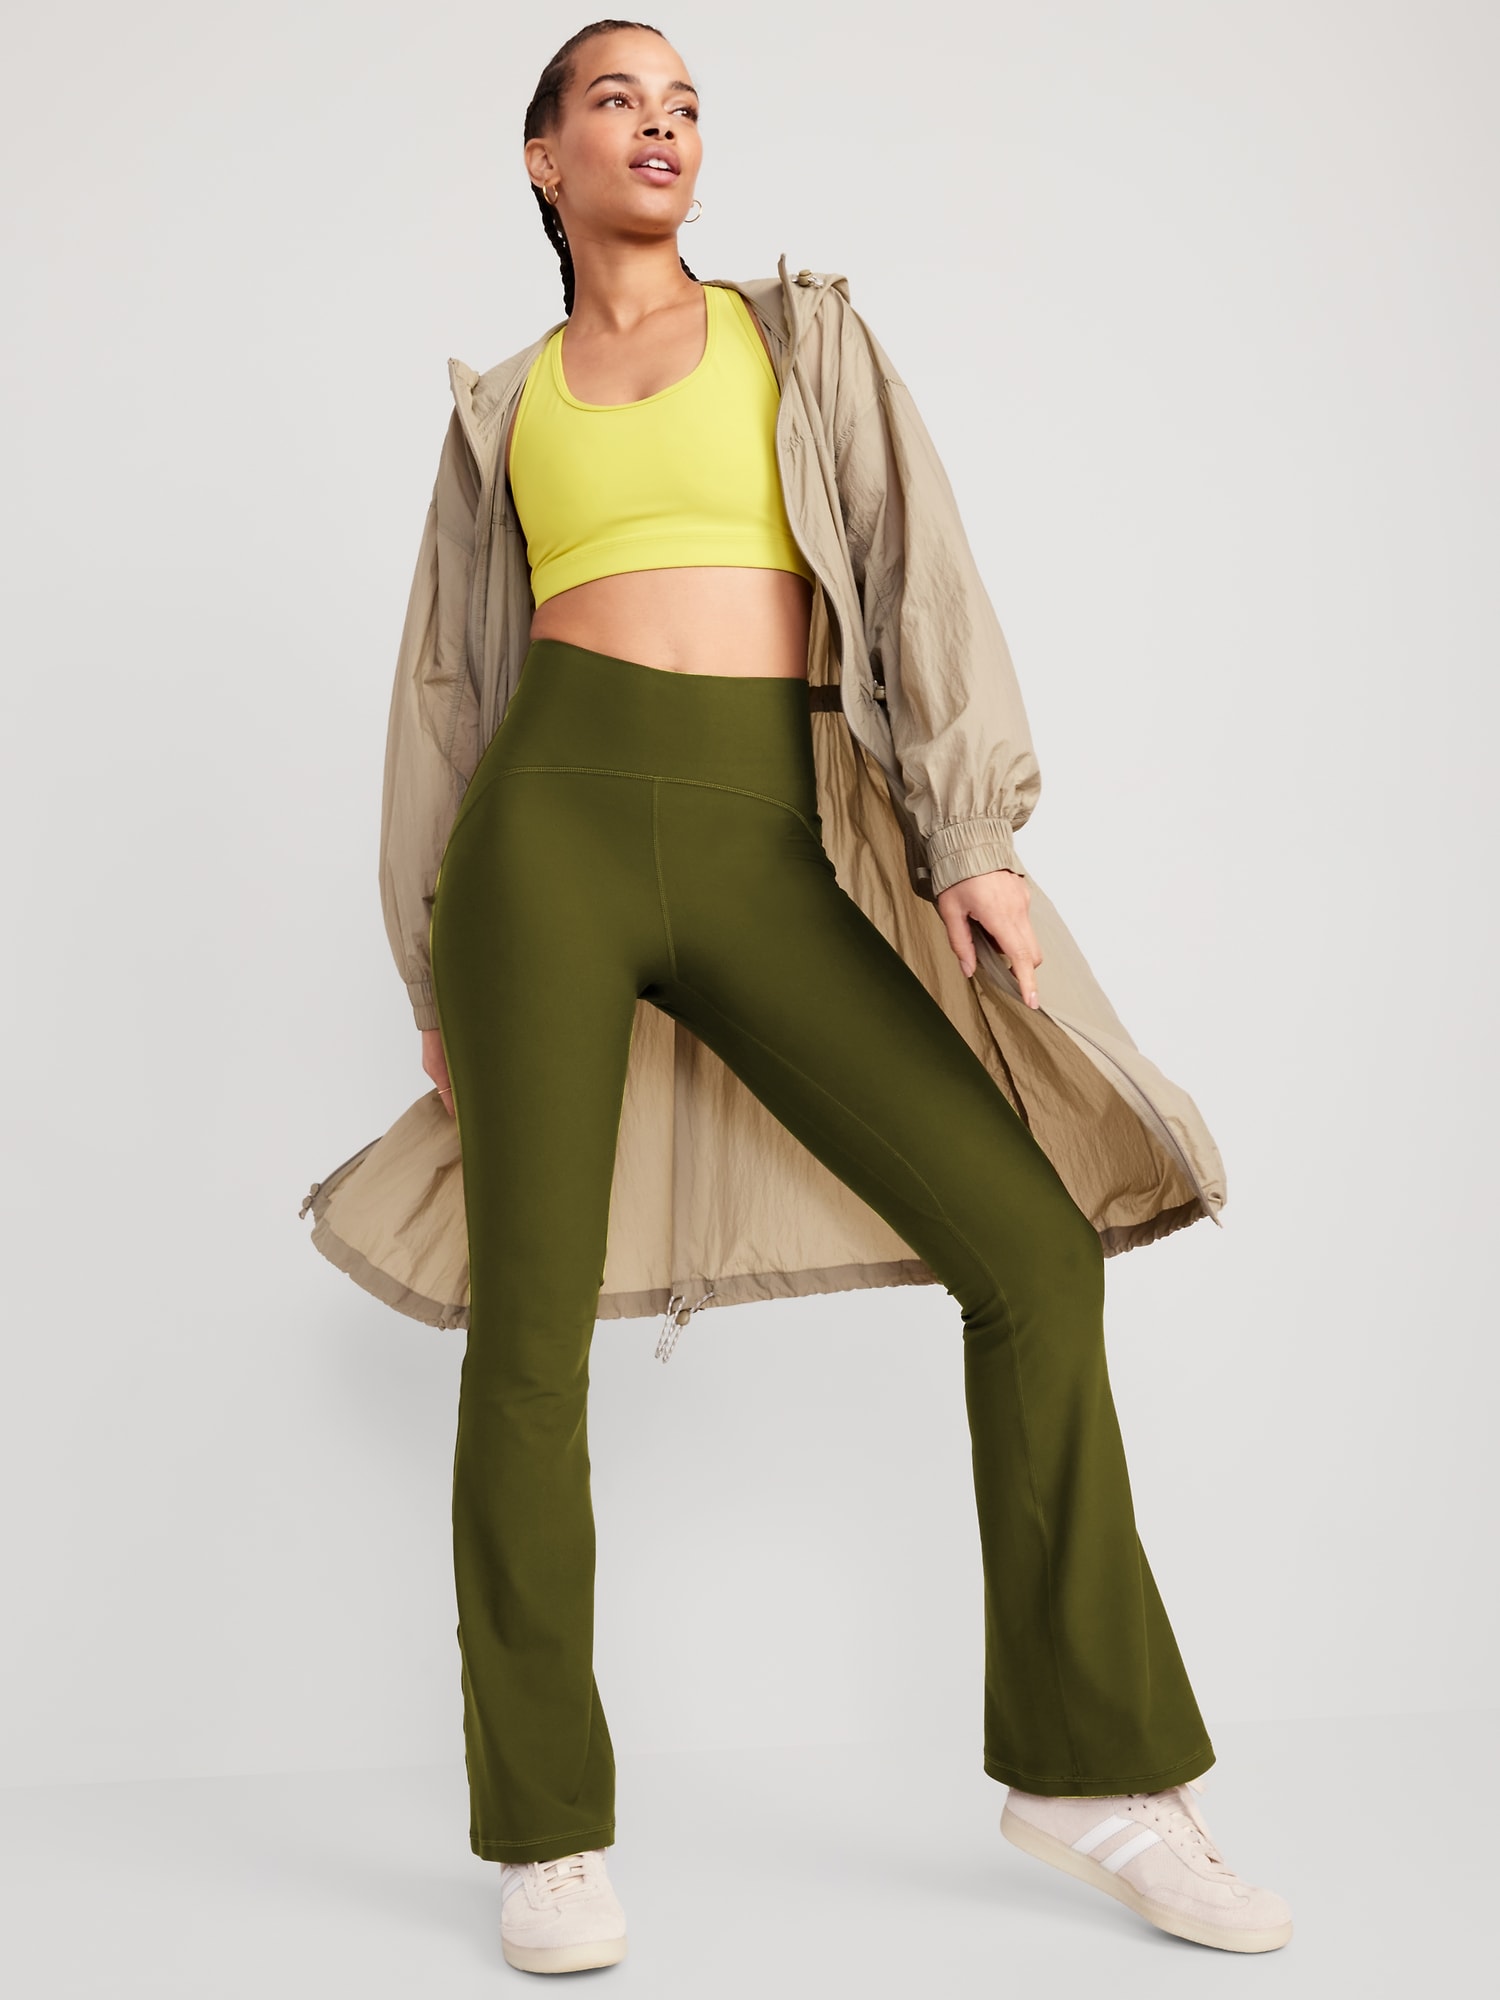 Old Navy High-Waisted PowerSoft Slim Flare Compression Pants, 15 New  Activewear Pieces From Old Navy That Caught Our Eye This Month (Starting at  $12!)